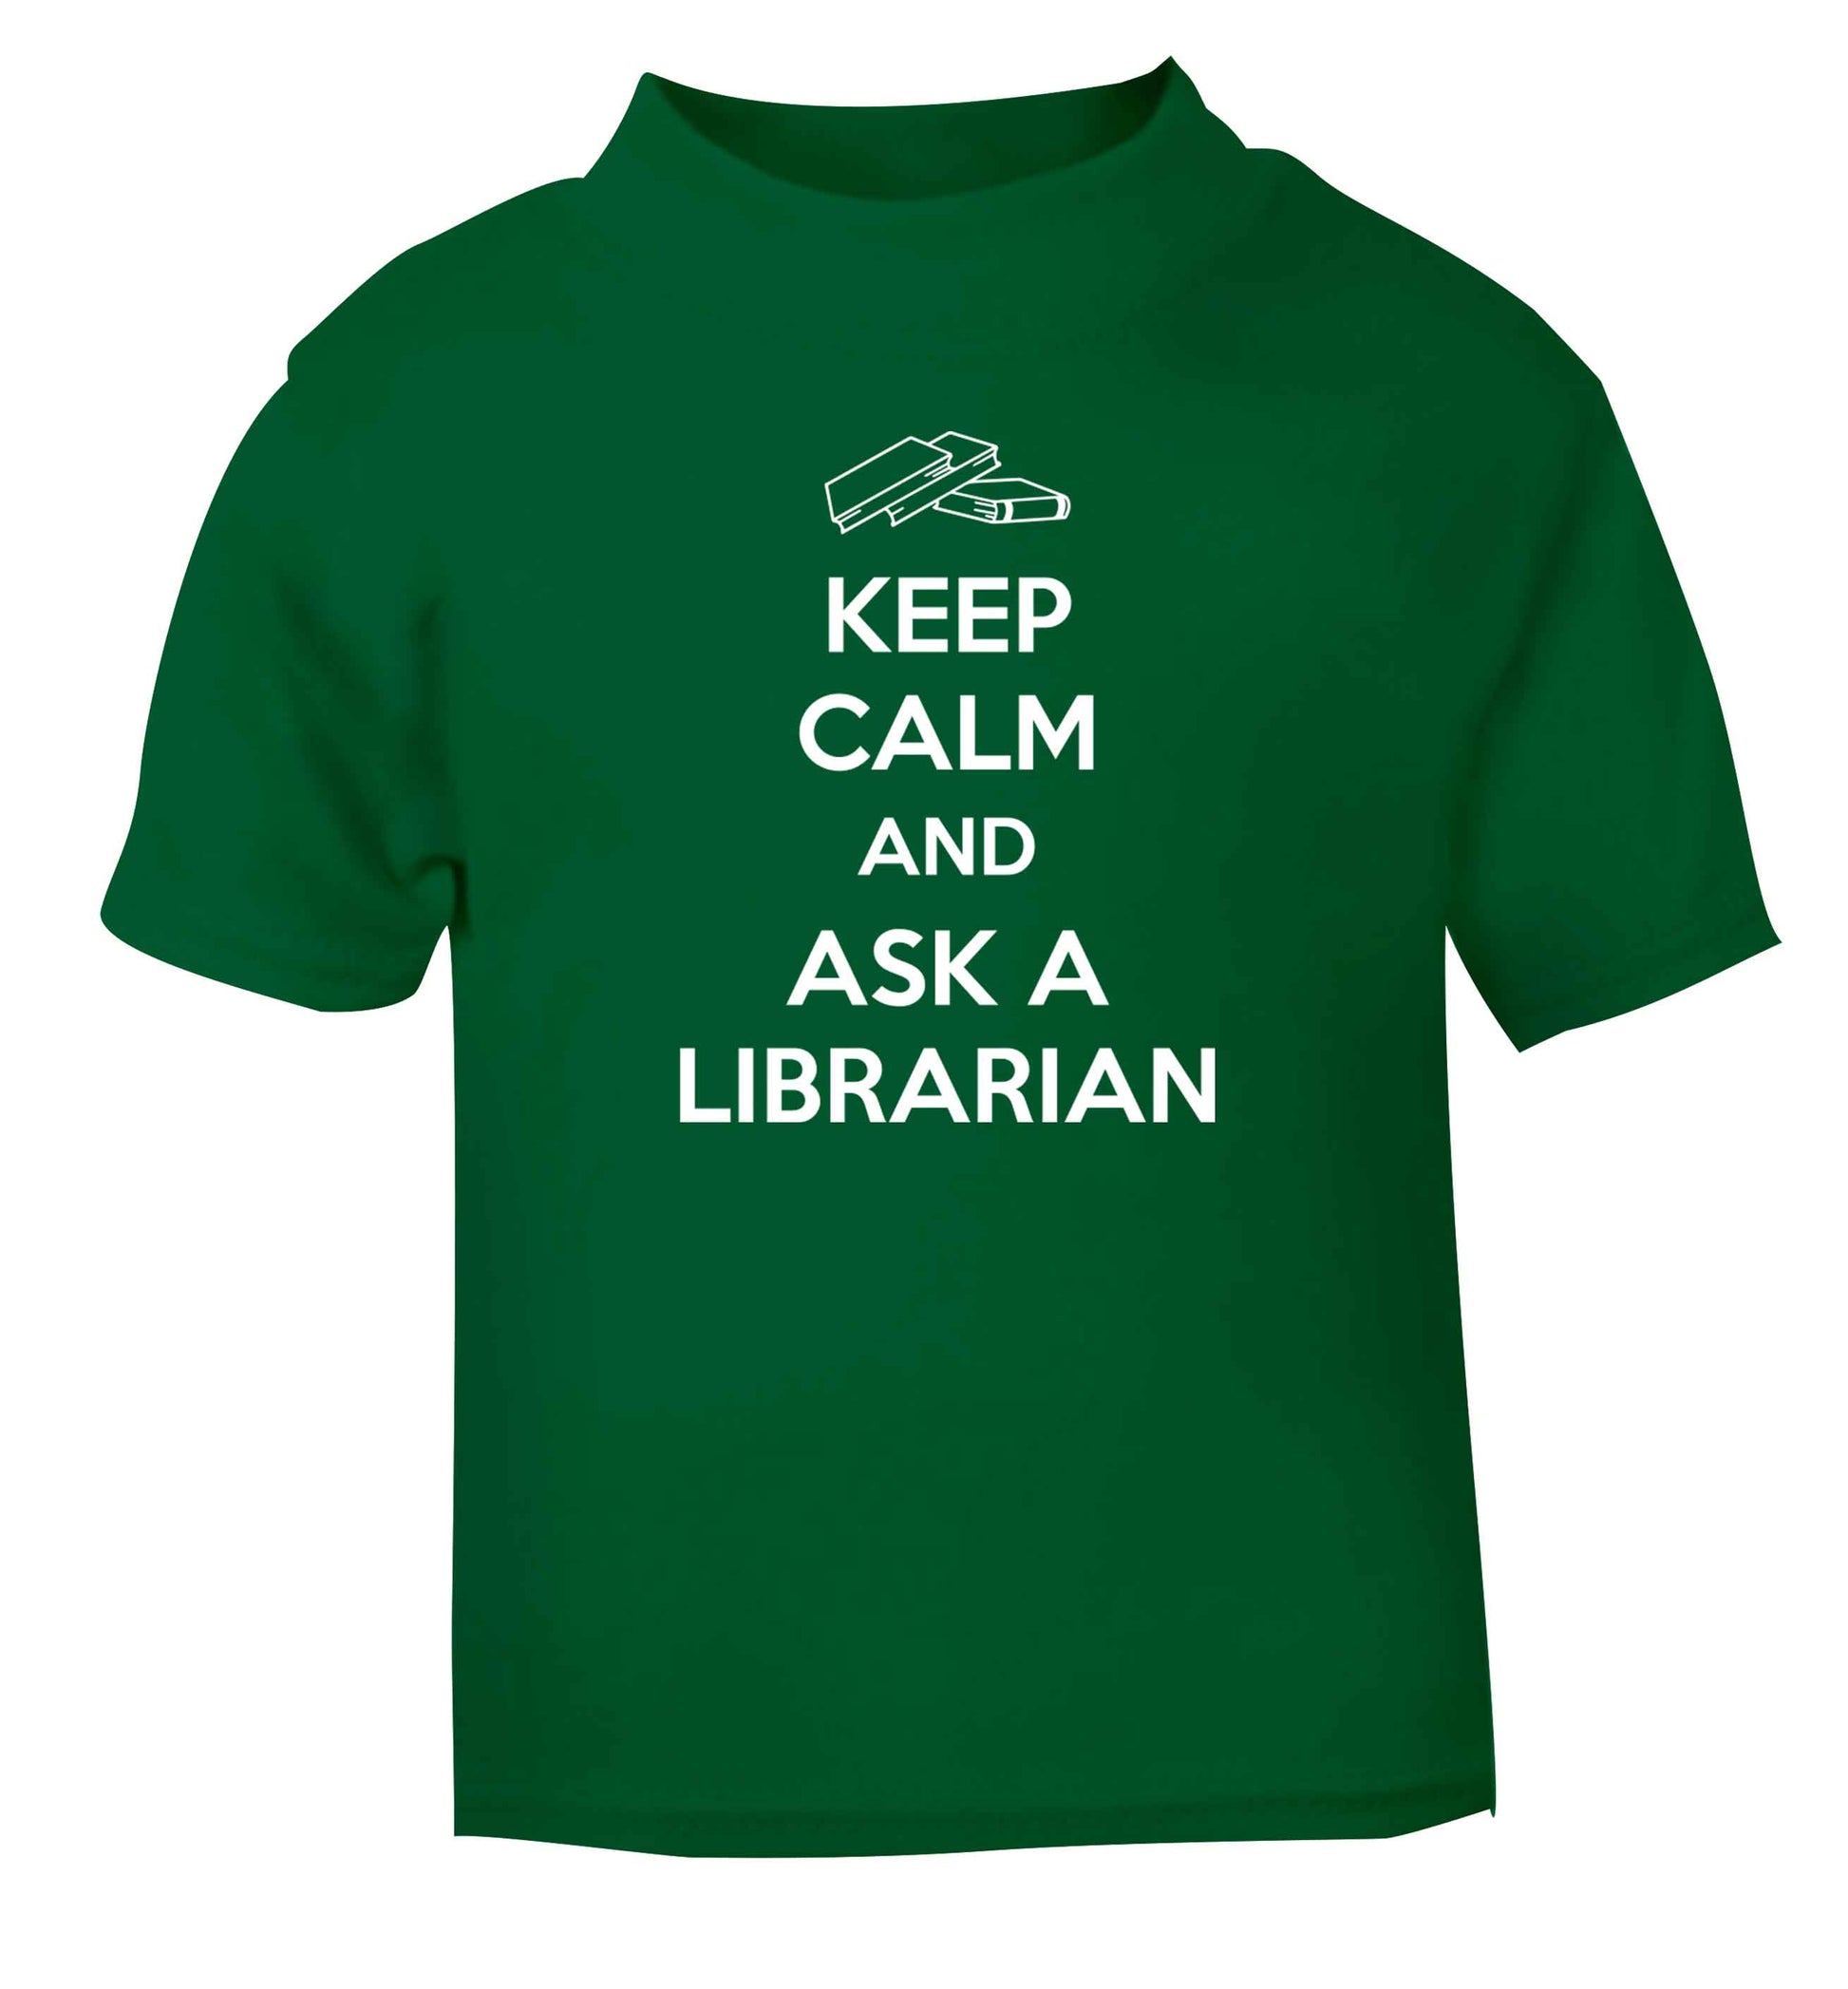 Keep calm and ask a librarian green Baby Toddler Tshirt 2 Years